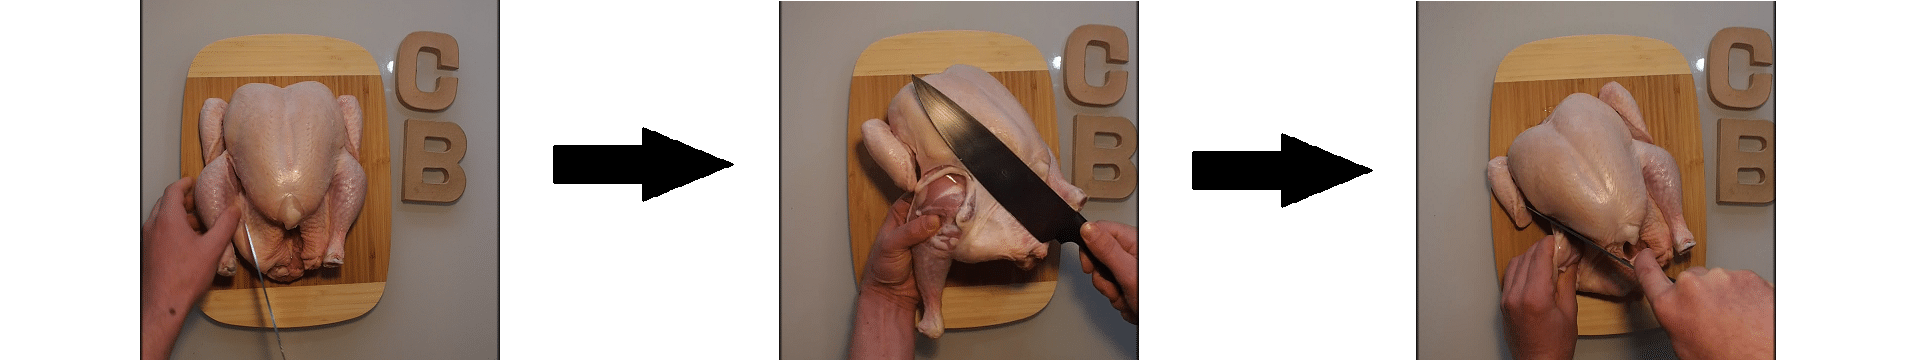 How To Cut up a Whole Chicken - Step 1